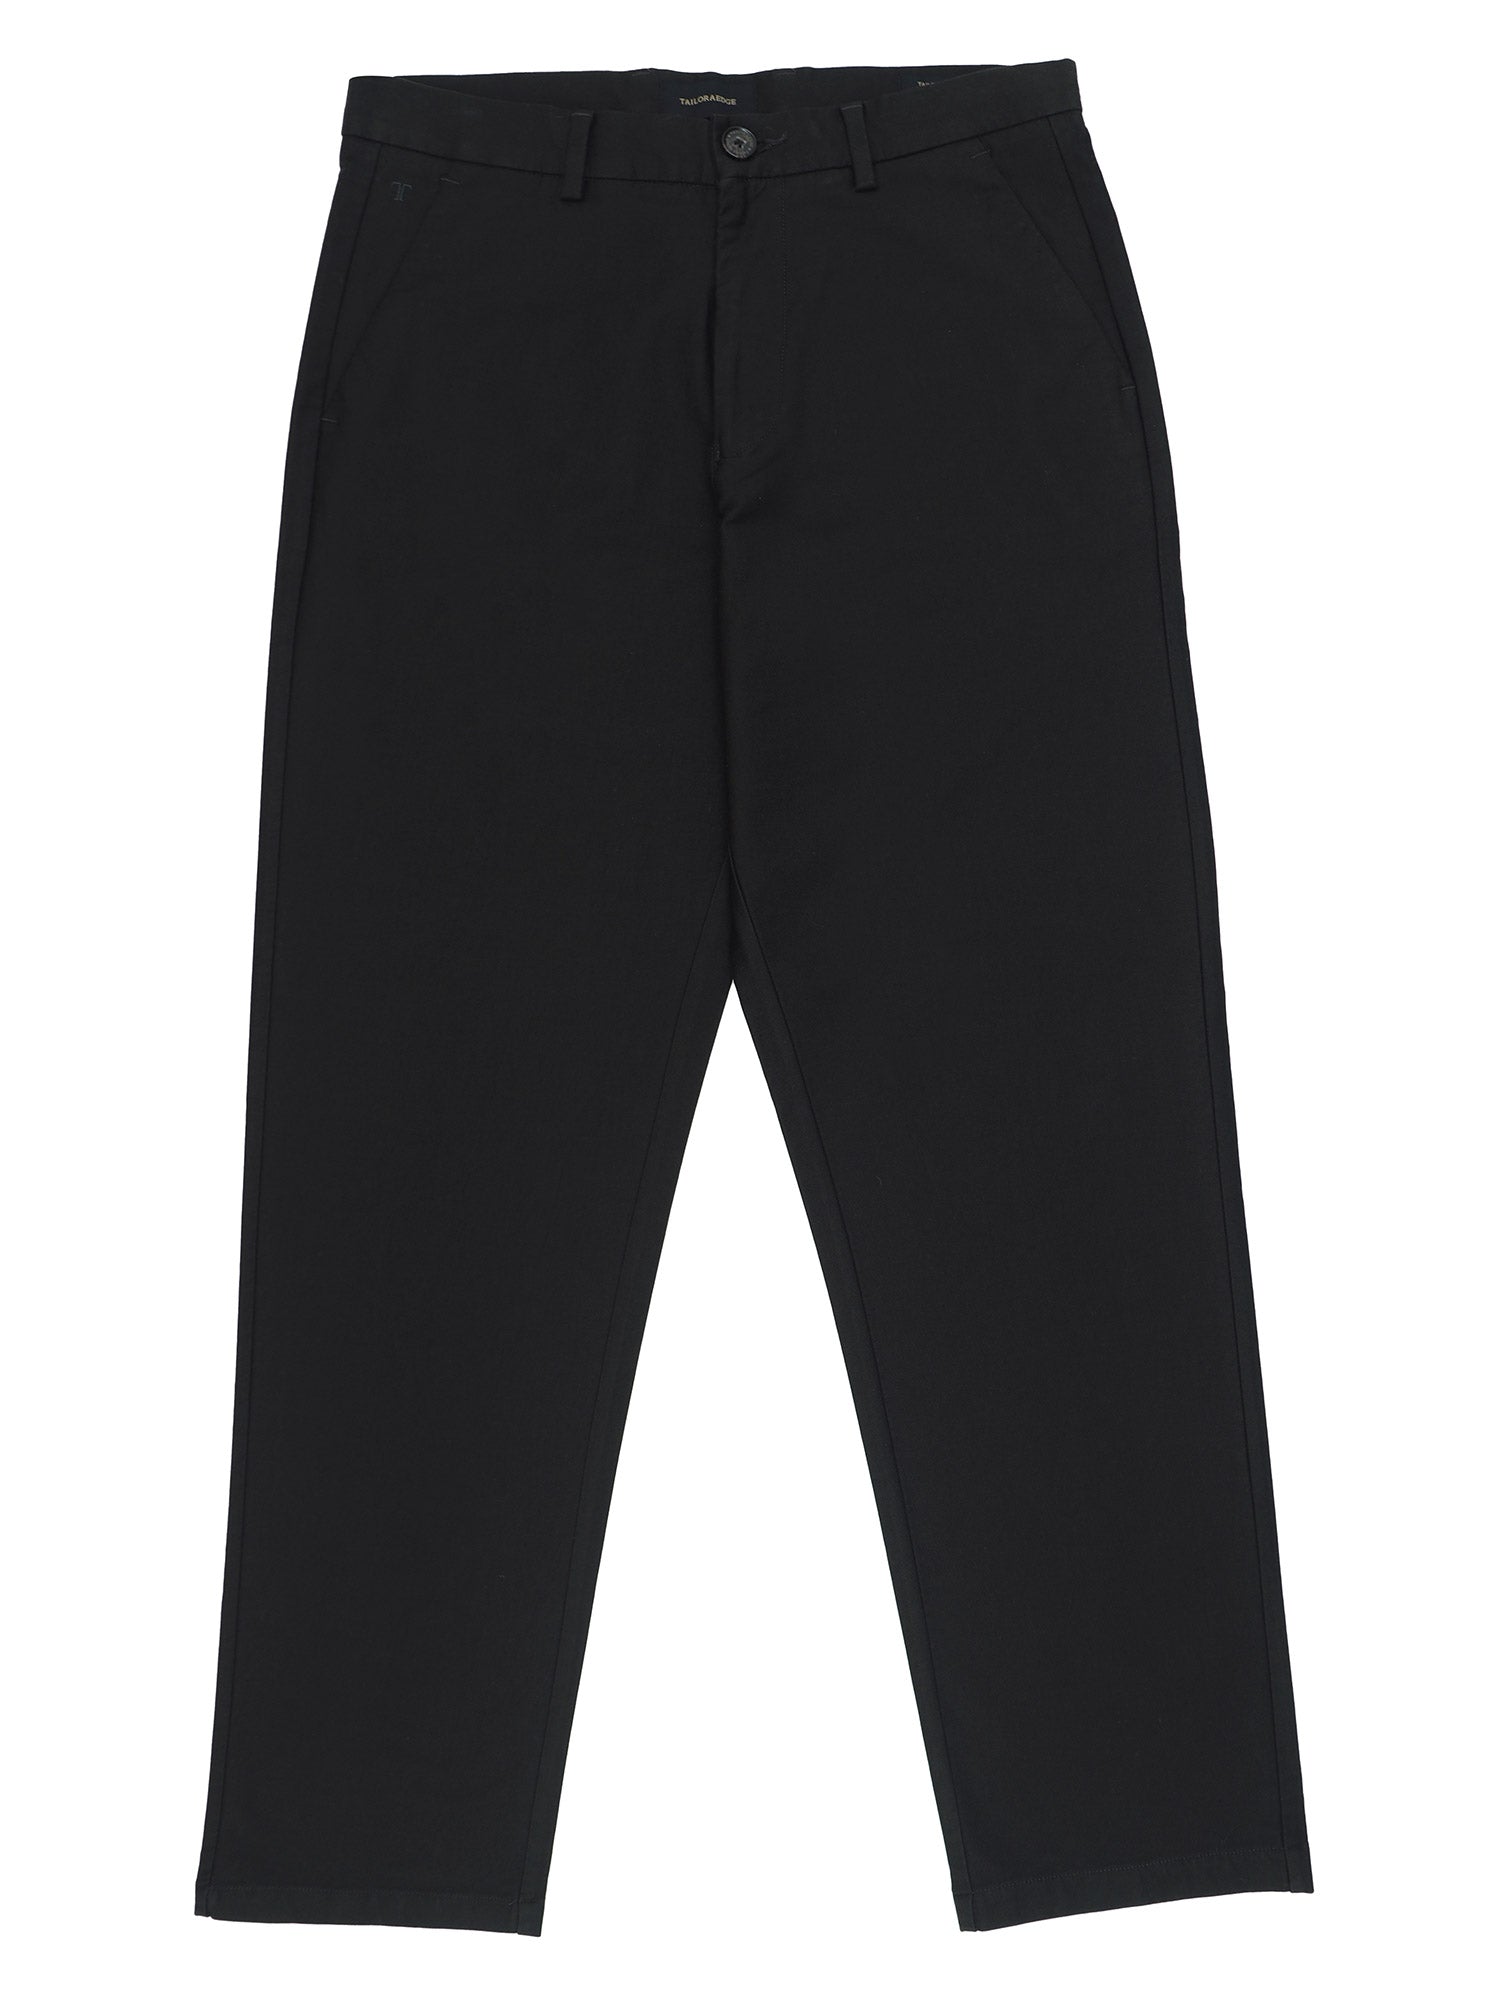 Soft Modal Black Relaxed Pant